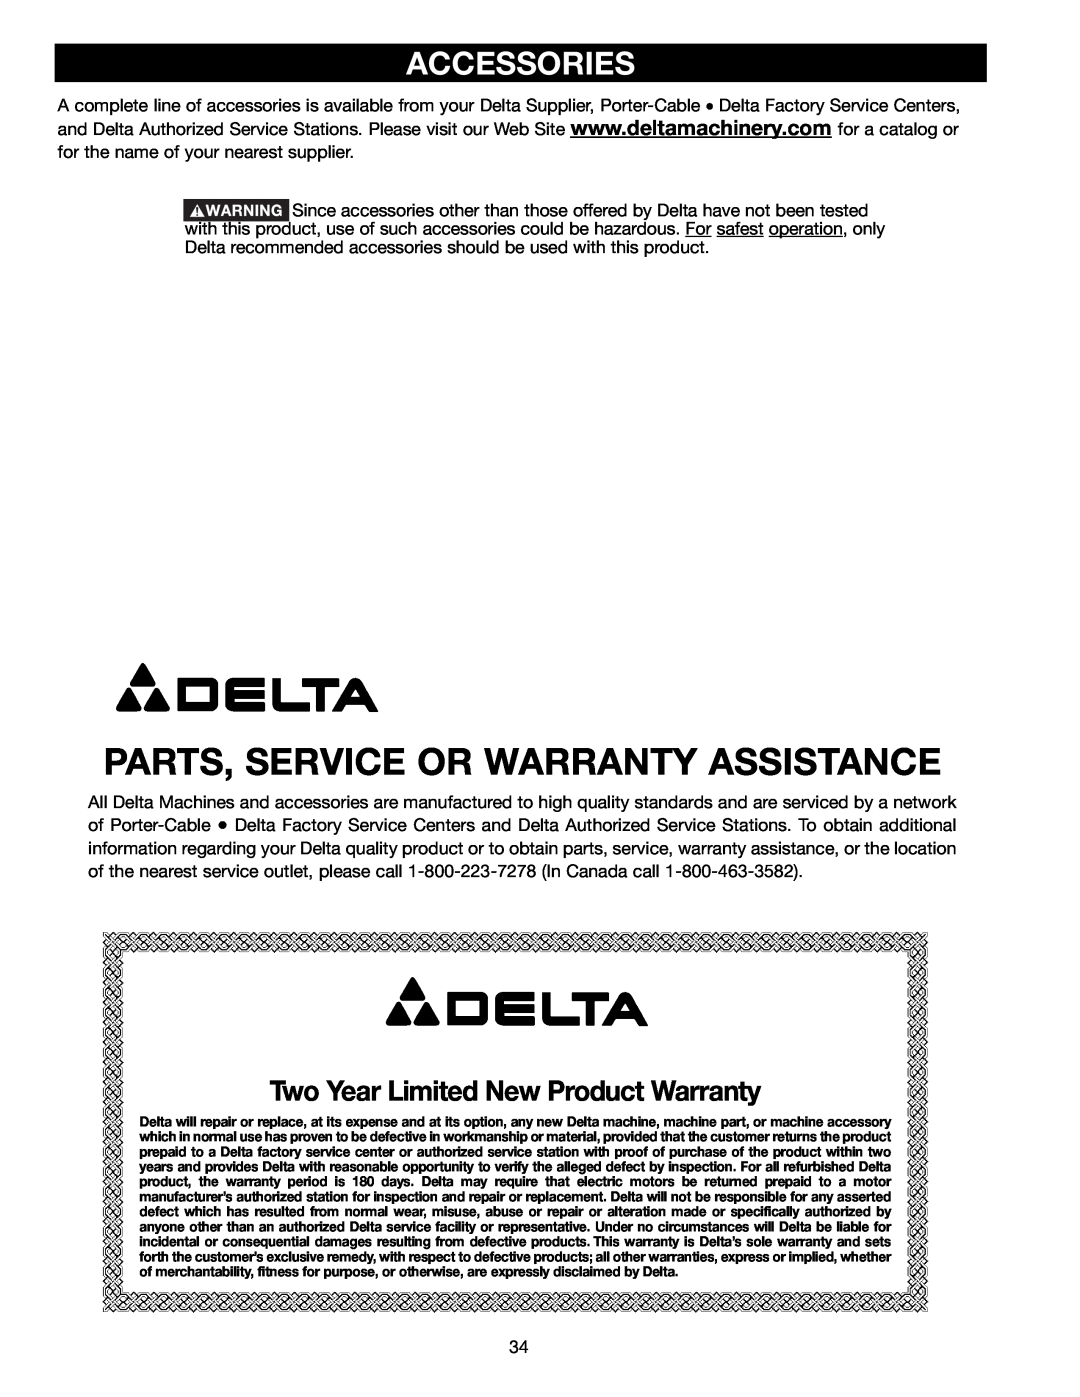 Delta 36-465 instruction manual Accessories, Parts, Service Or Warranty Assistance, Two Year Limited New Product Warranty 